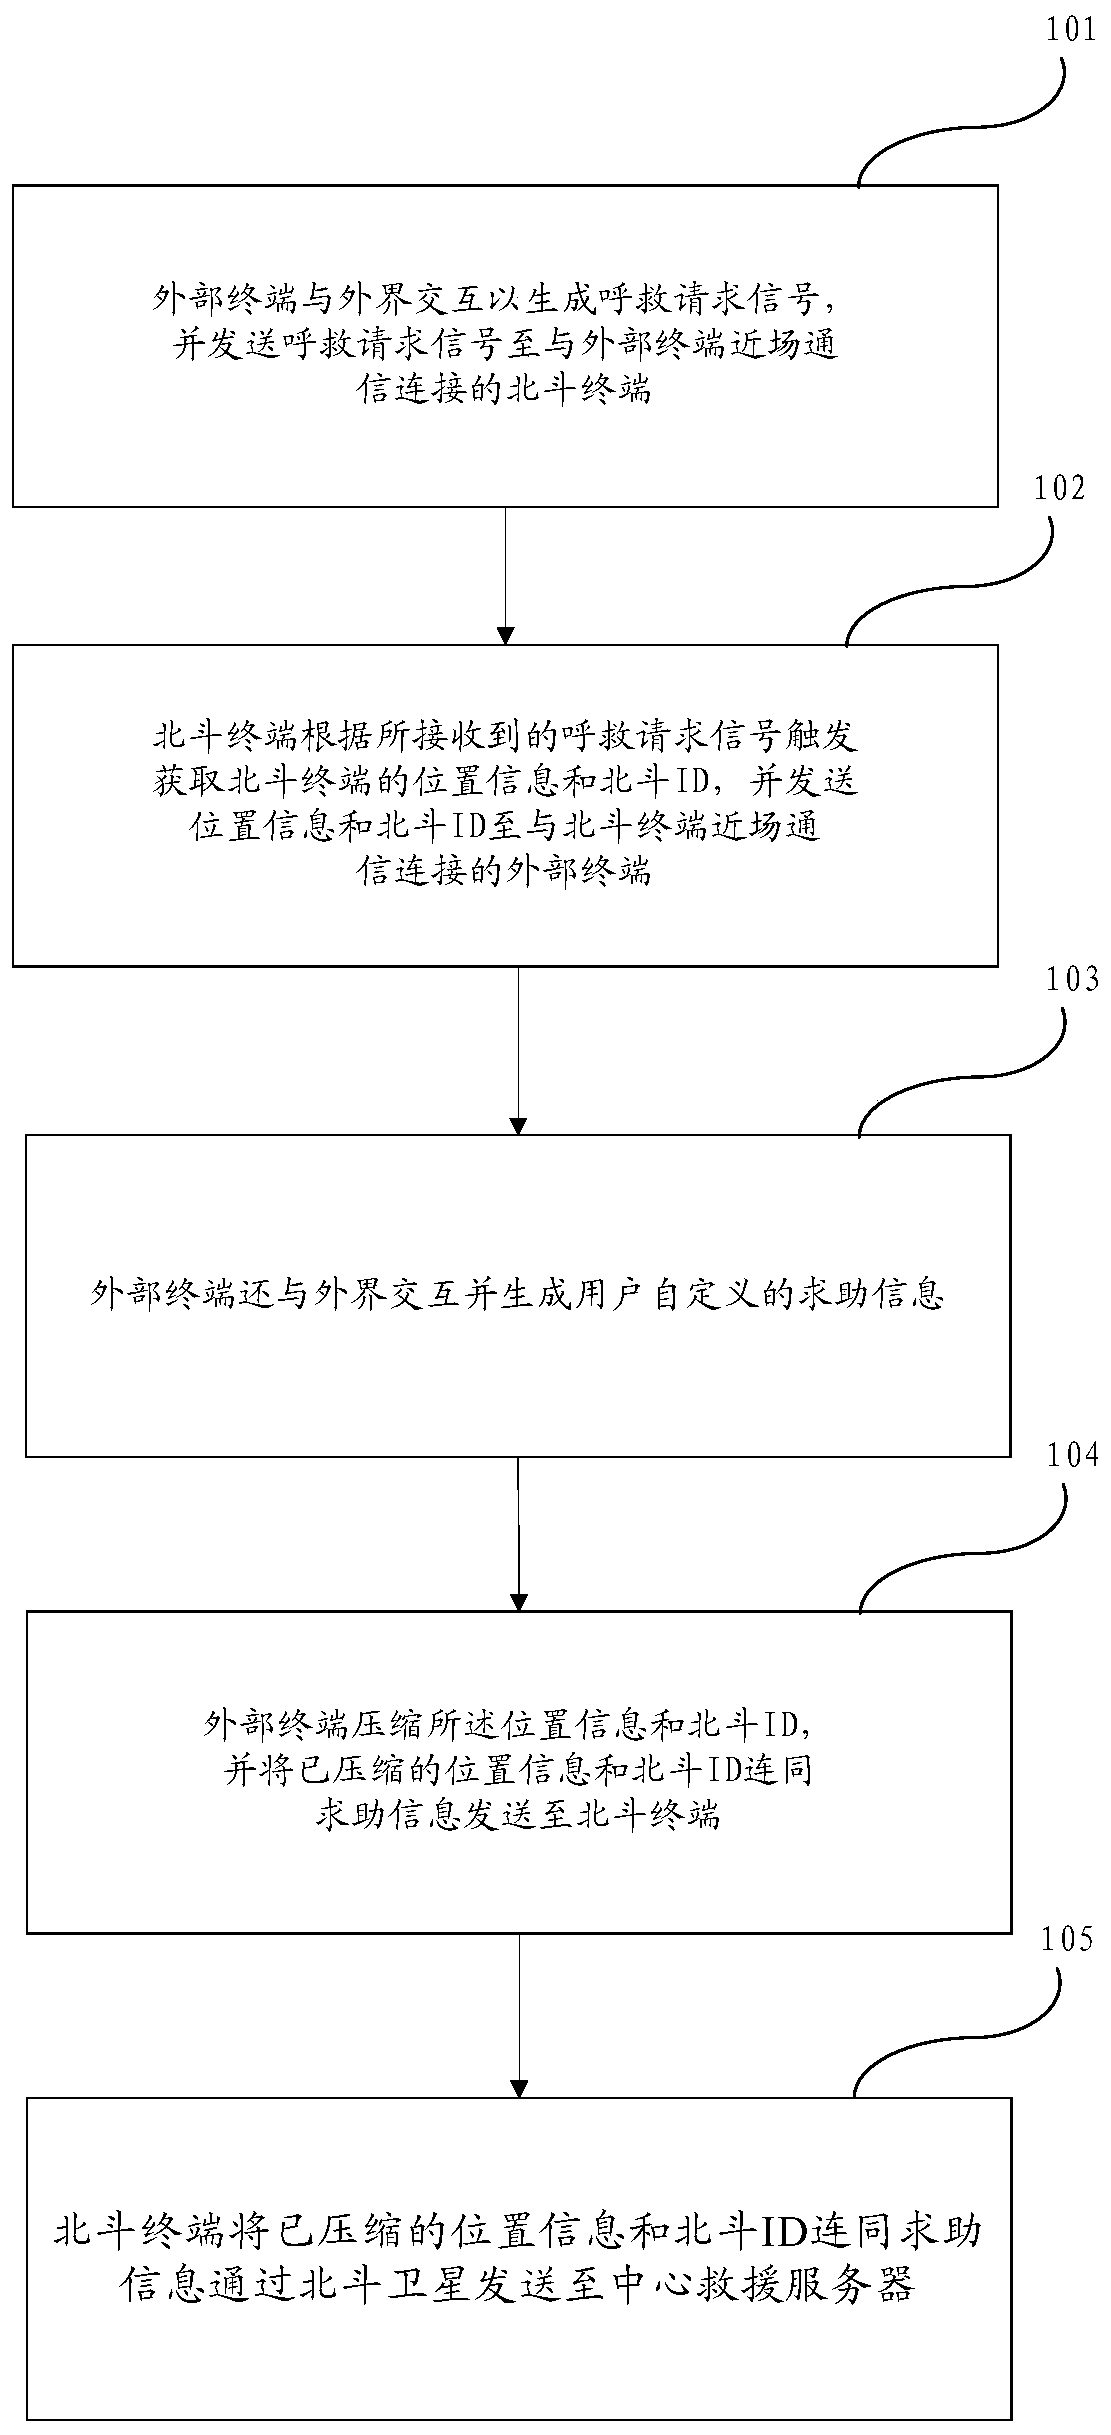 A Beidou emergency calling method and system